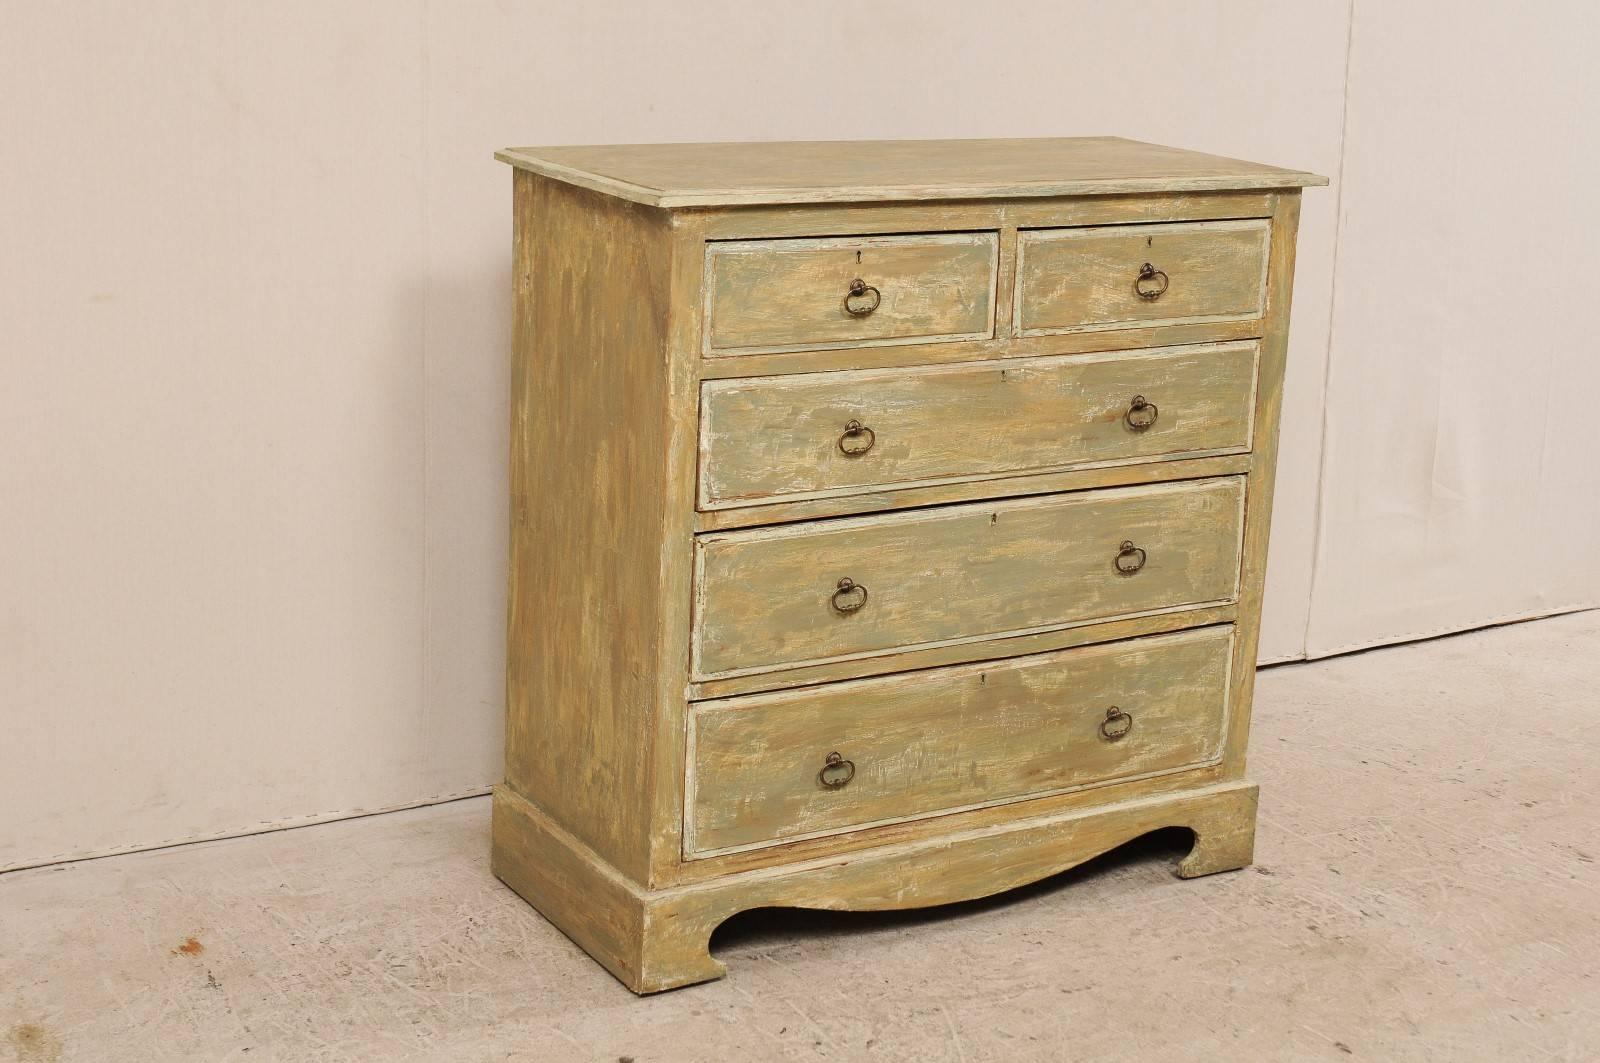 Carved Swedish Painted Wood Five-Drawer Antique Chest in Green-Grey and Beige Tones